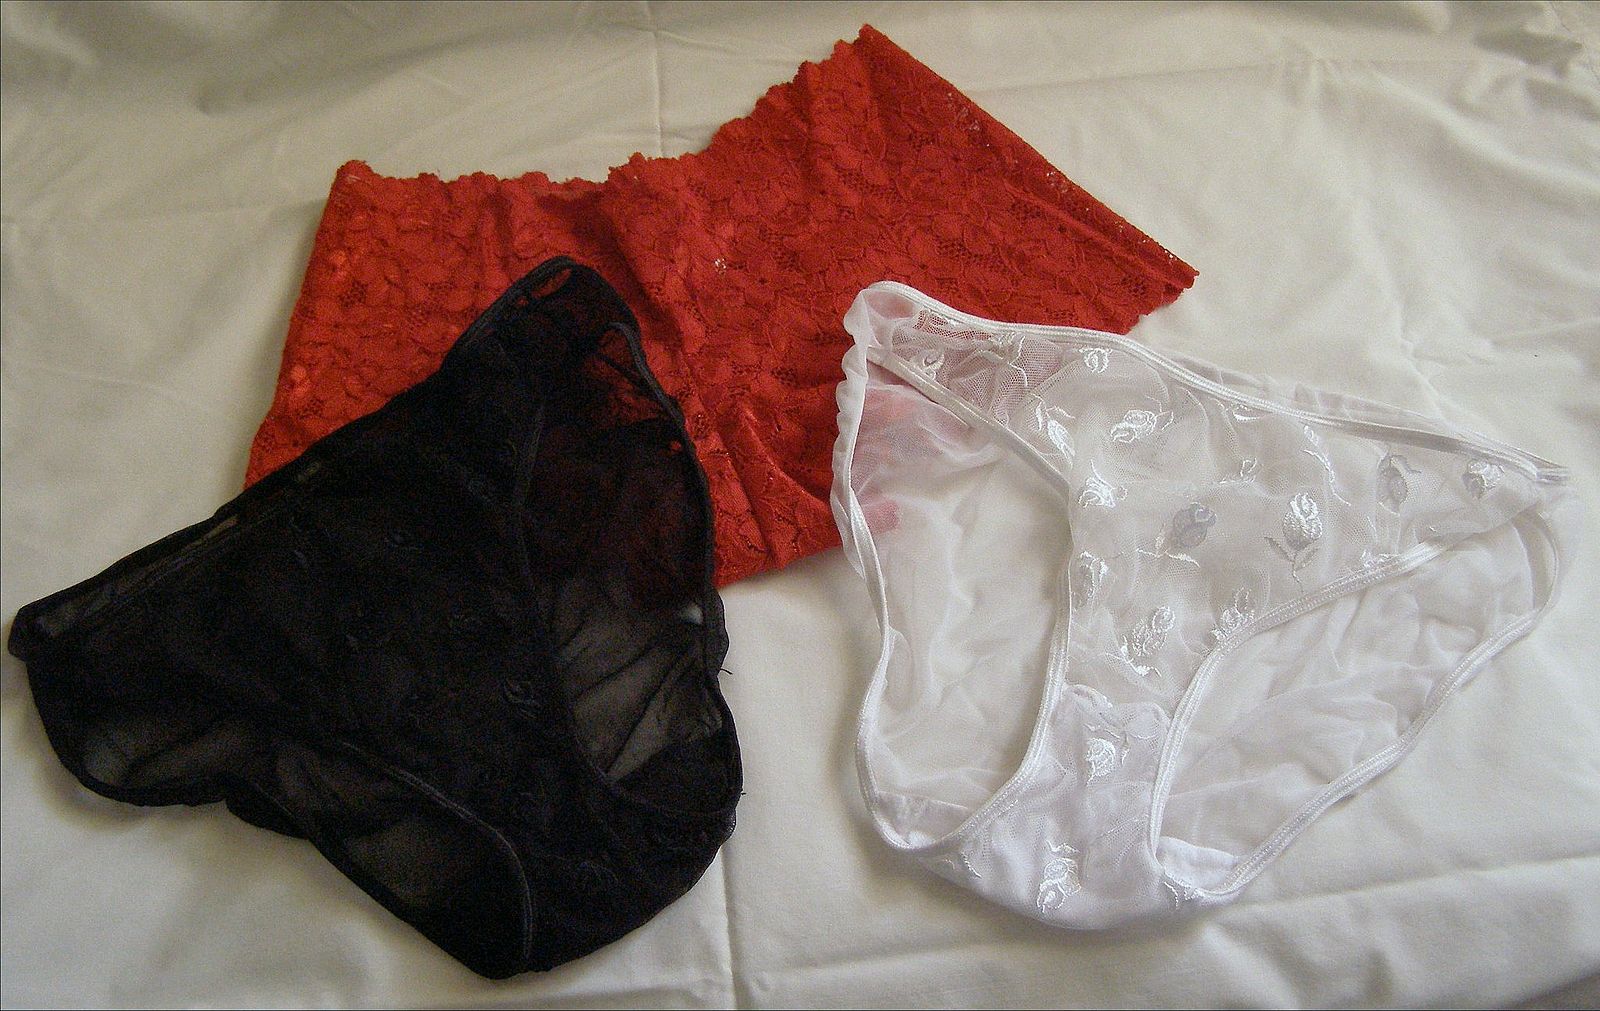 How Much Money Can You Make Selling Used Panties? 